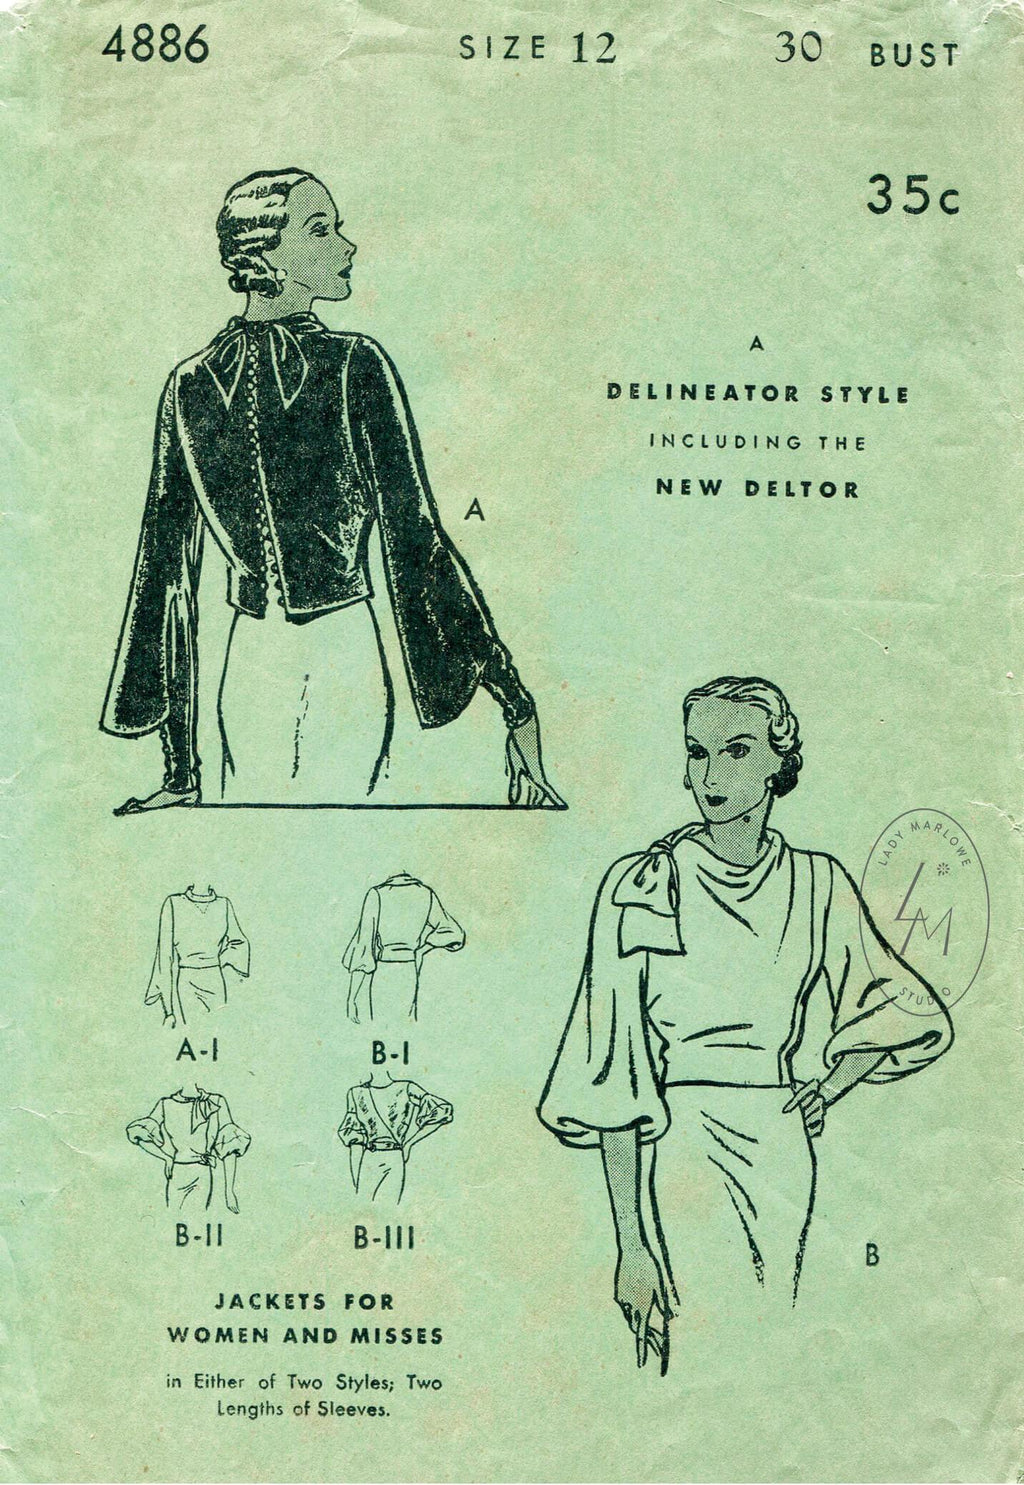 Butterick 4886 1930s blouse vintage sewing pattern 1930 30s